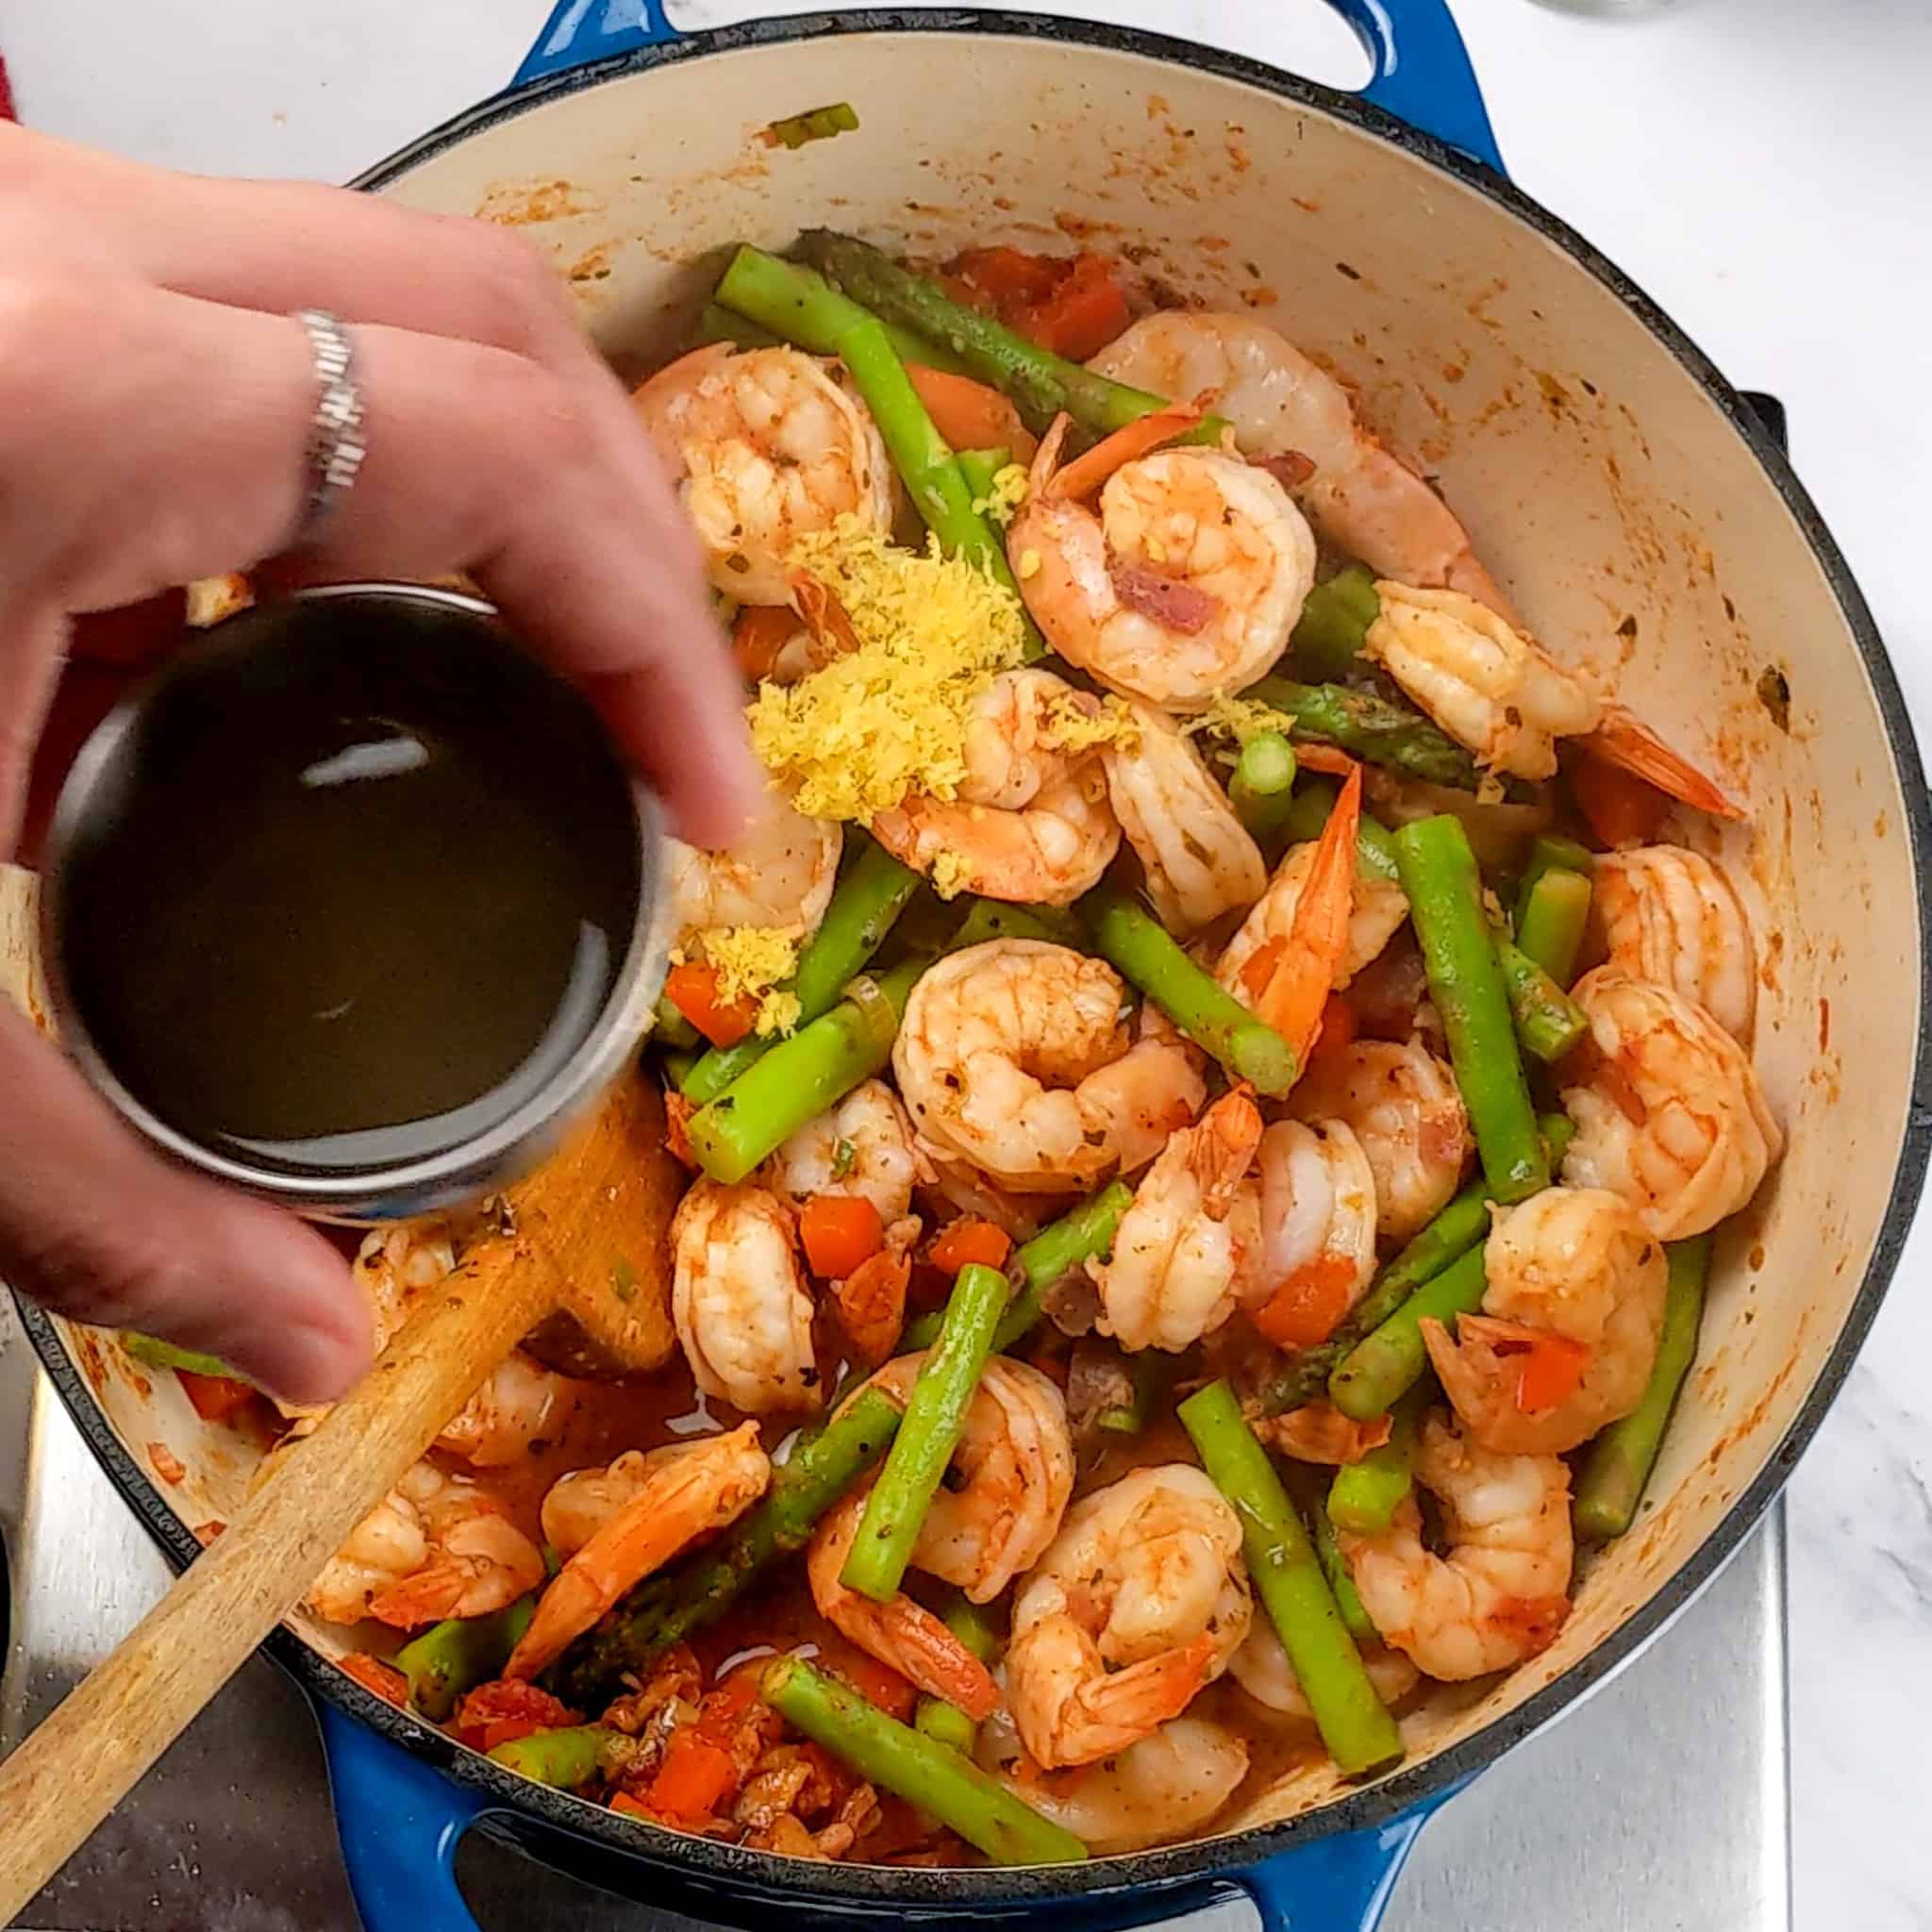 cooked diced red bell pepper with bacon, cooked sliced scallions, chopped garlic and tomato sauce, shrimp and asparagus cooked in a pot with a wooden spoon with a small cup of lemon juice held over the pot